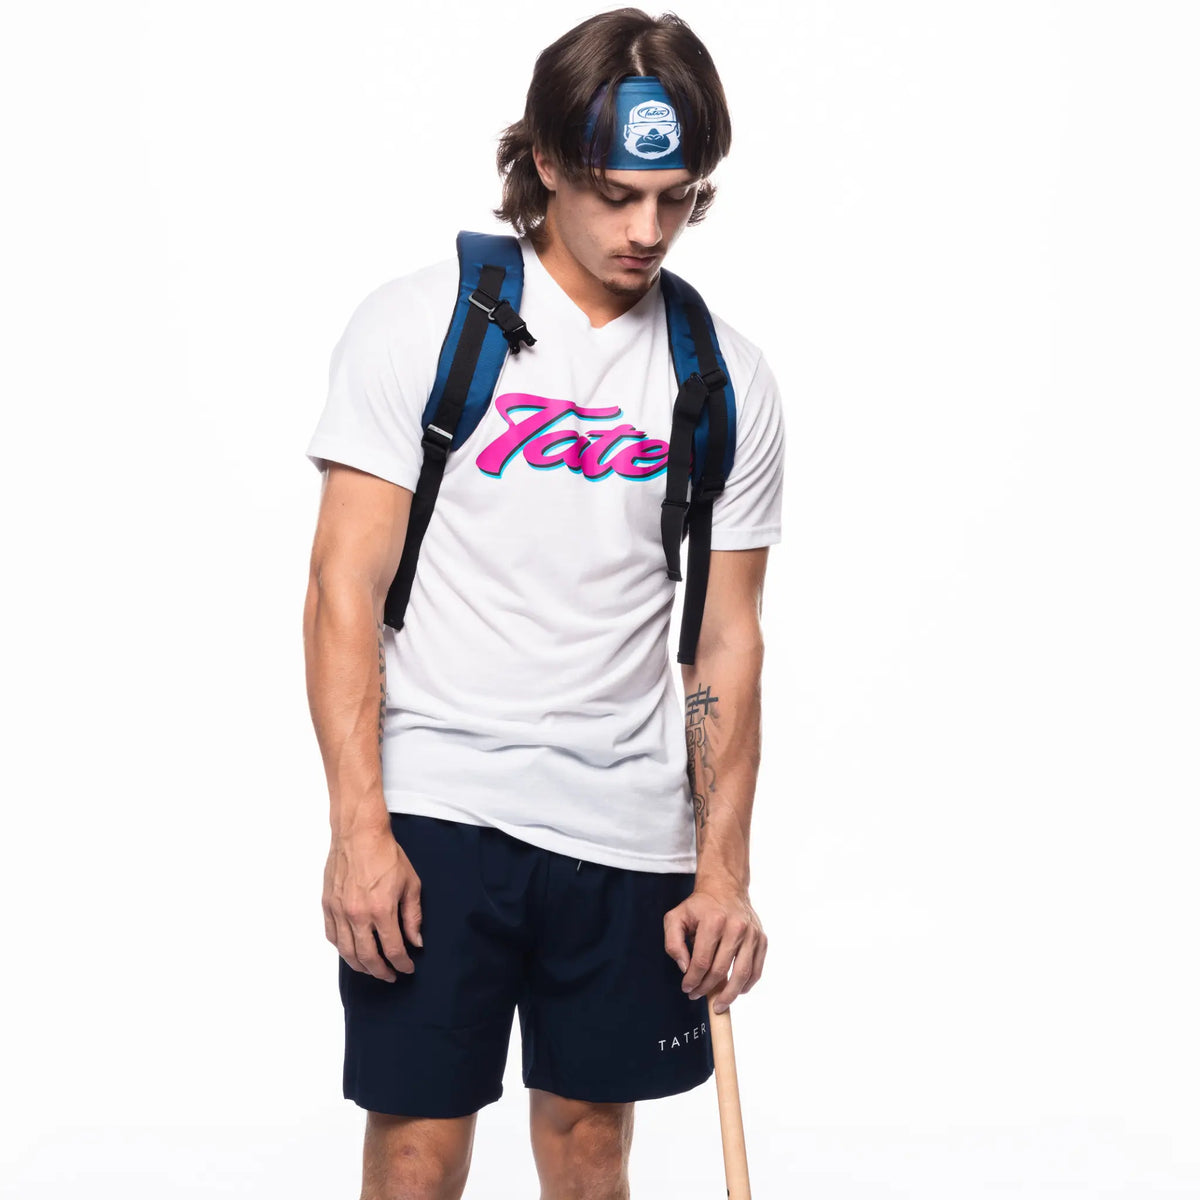 In the image, there is a male model wearing a white T-shirt with a colorful &quot;Tater&quot; logo on the front, navy workout shorts with the Tater brand name, a baseball headband, and a black backpack. He is also holding a wooden baseball bat in his right hand. The overall look appears to be casual and suitable for both athletic activities and casual wear.